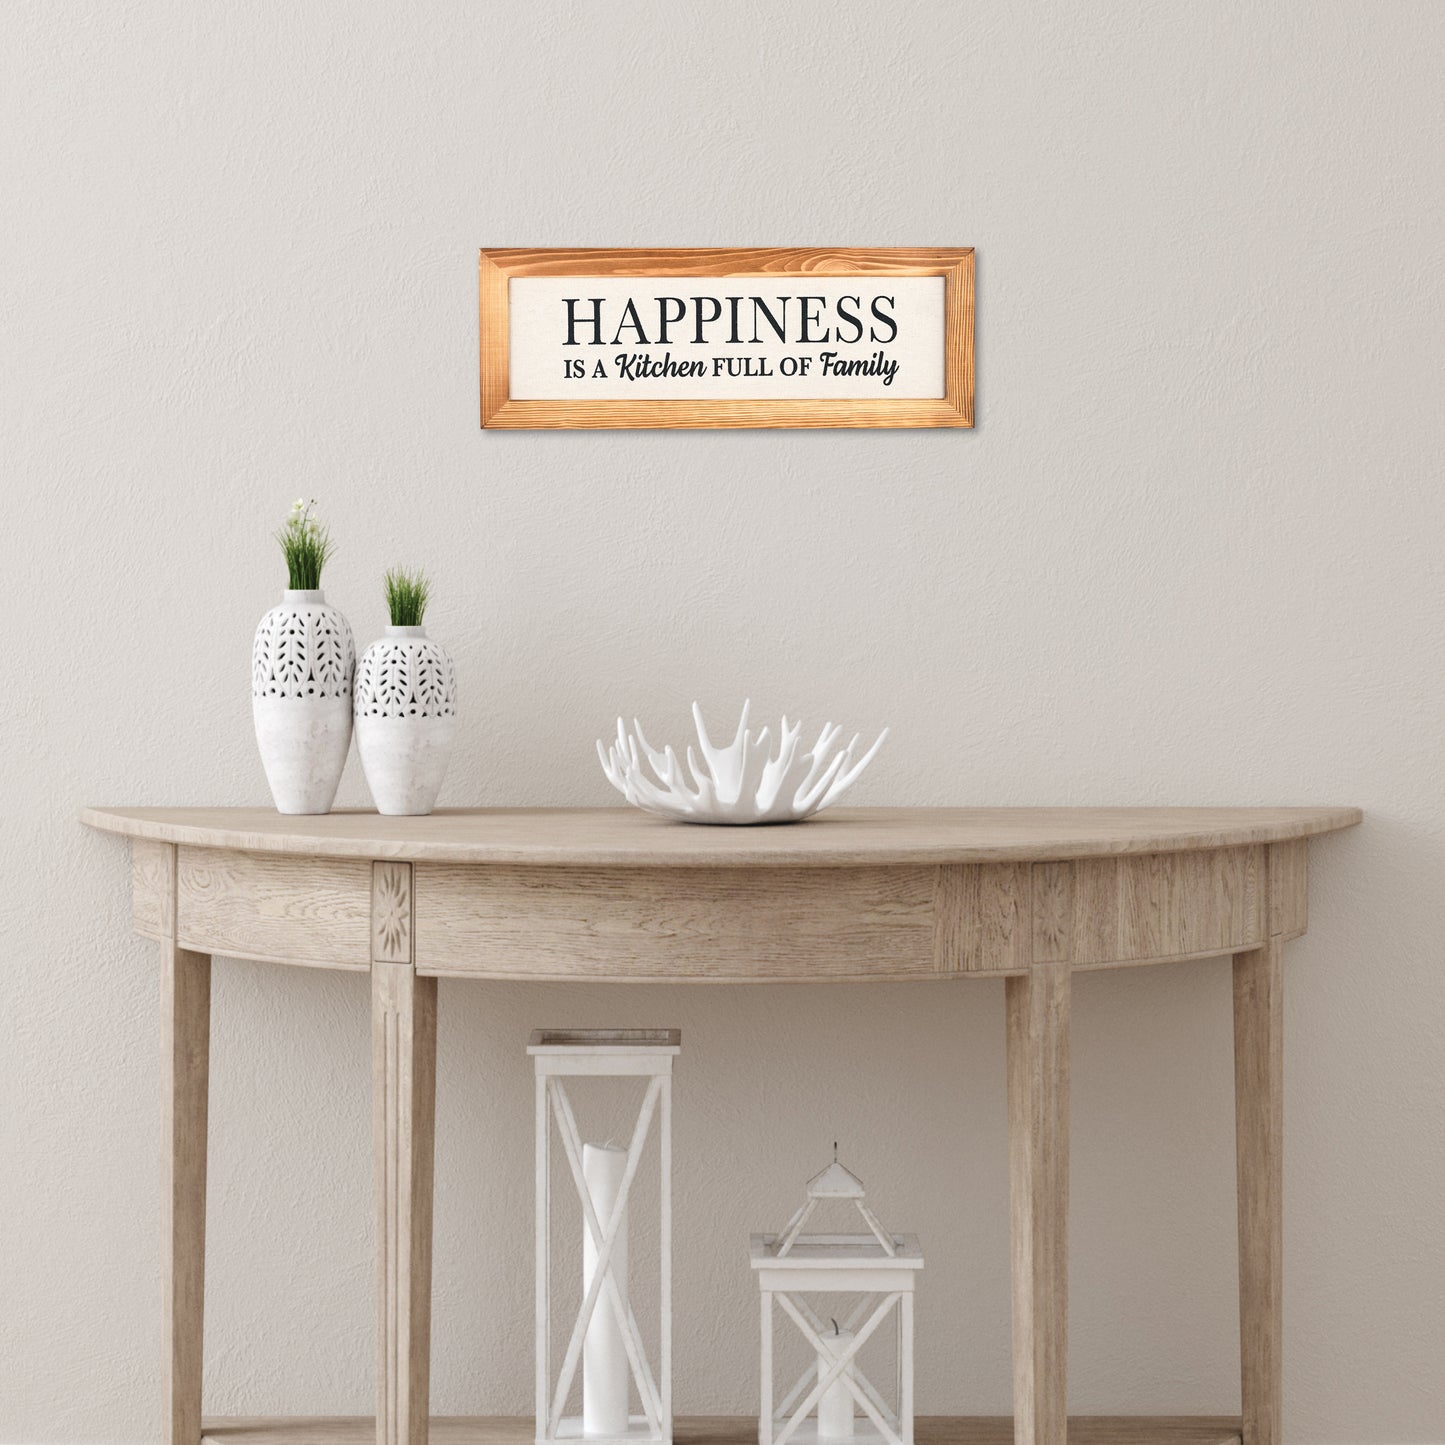 Happiness is a Kitchen Full of Family - 16" x 6" Canvas Sign